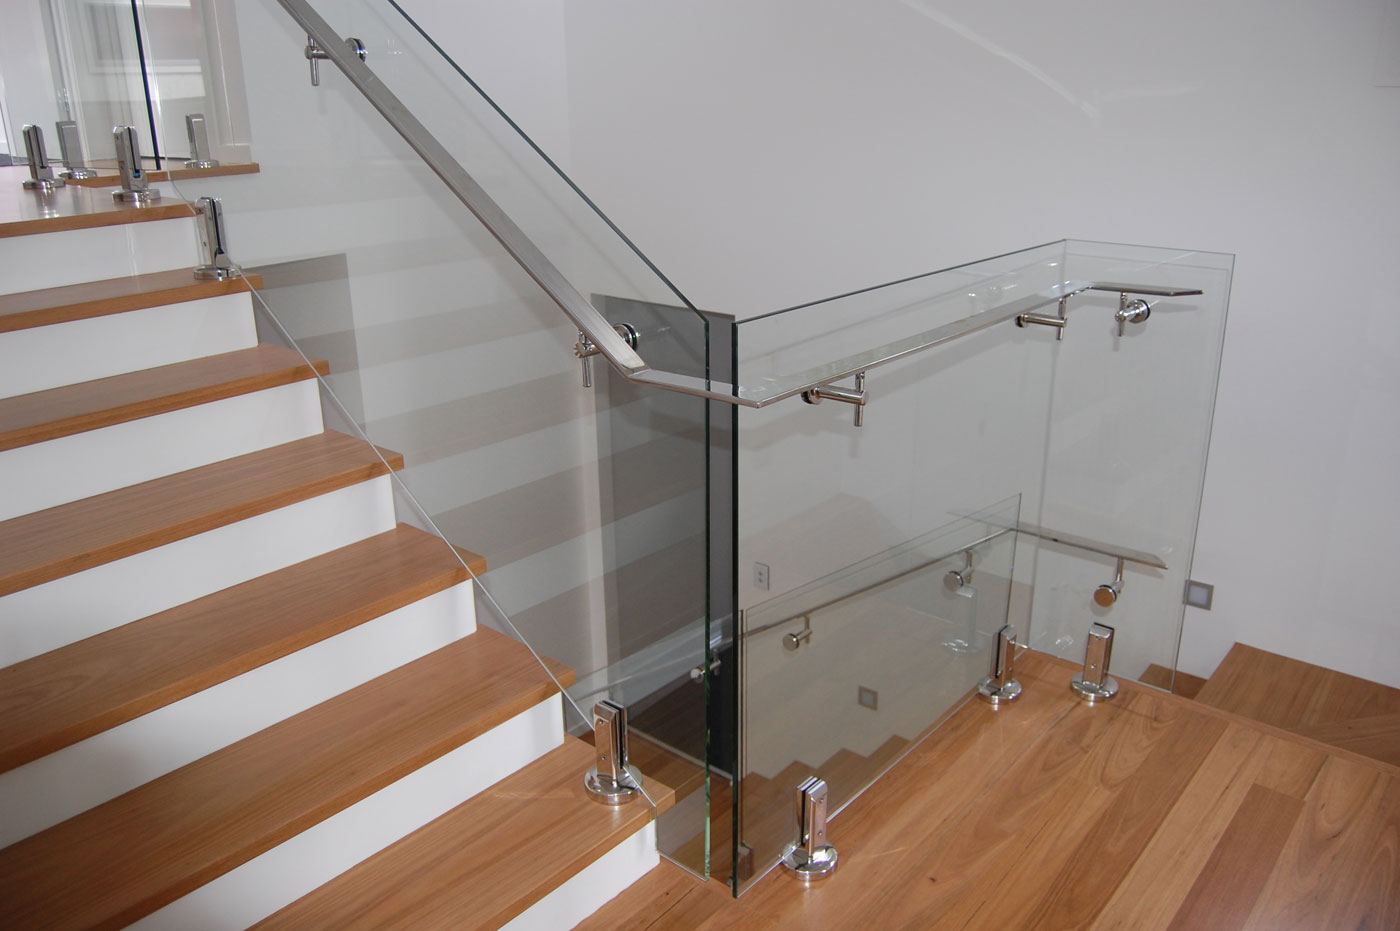 12mm Clear Toughened Glass - Flat Polished Edgework / Framless Internal Balustrades with Spigotts and Handrail - DnD Glass & Glazing